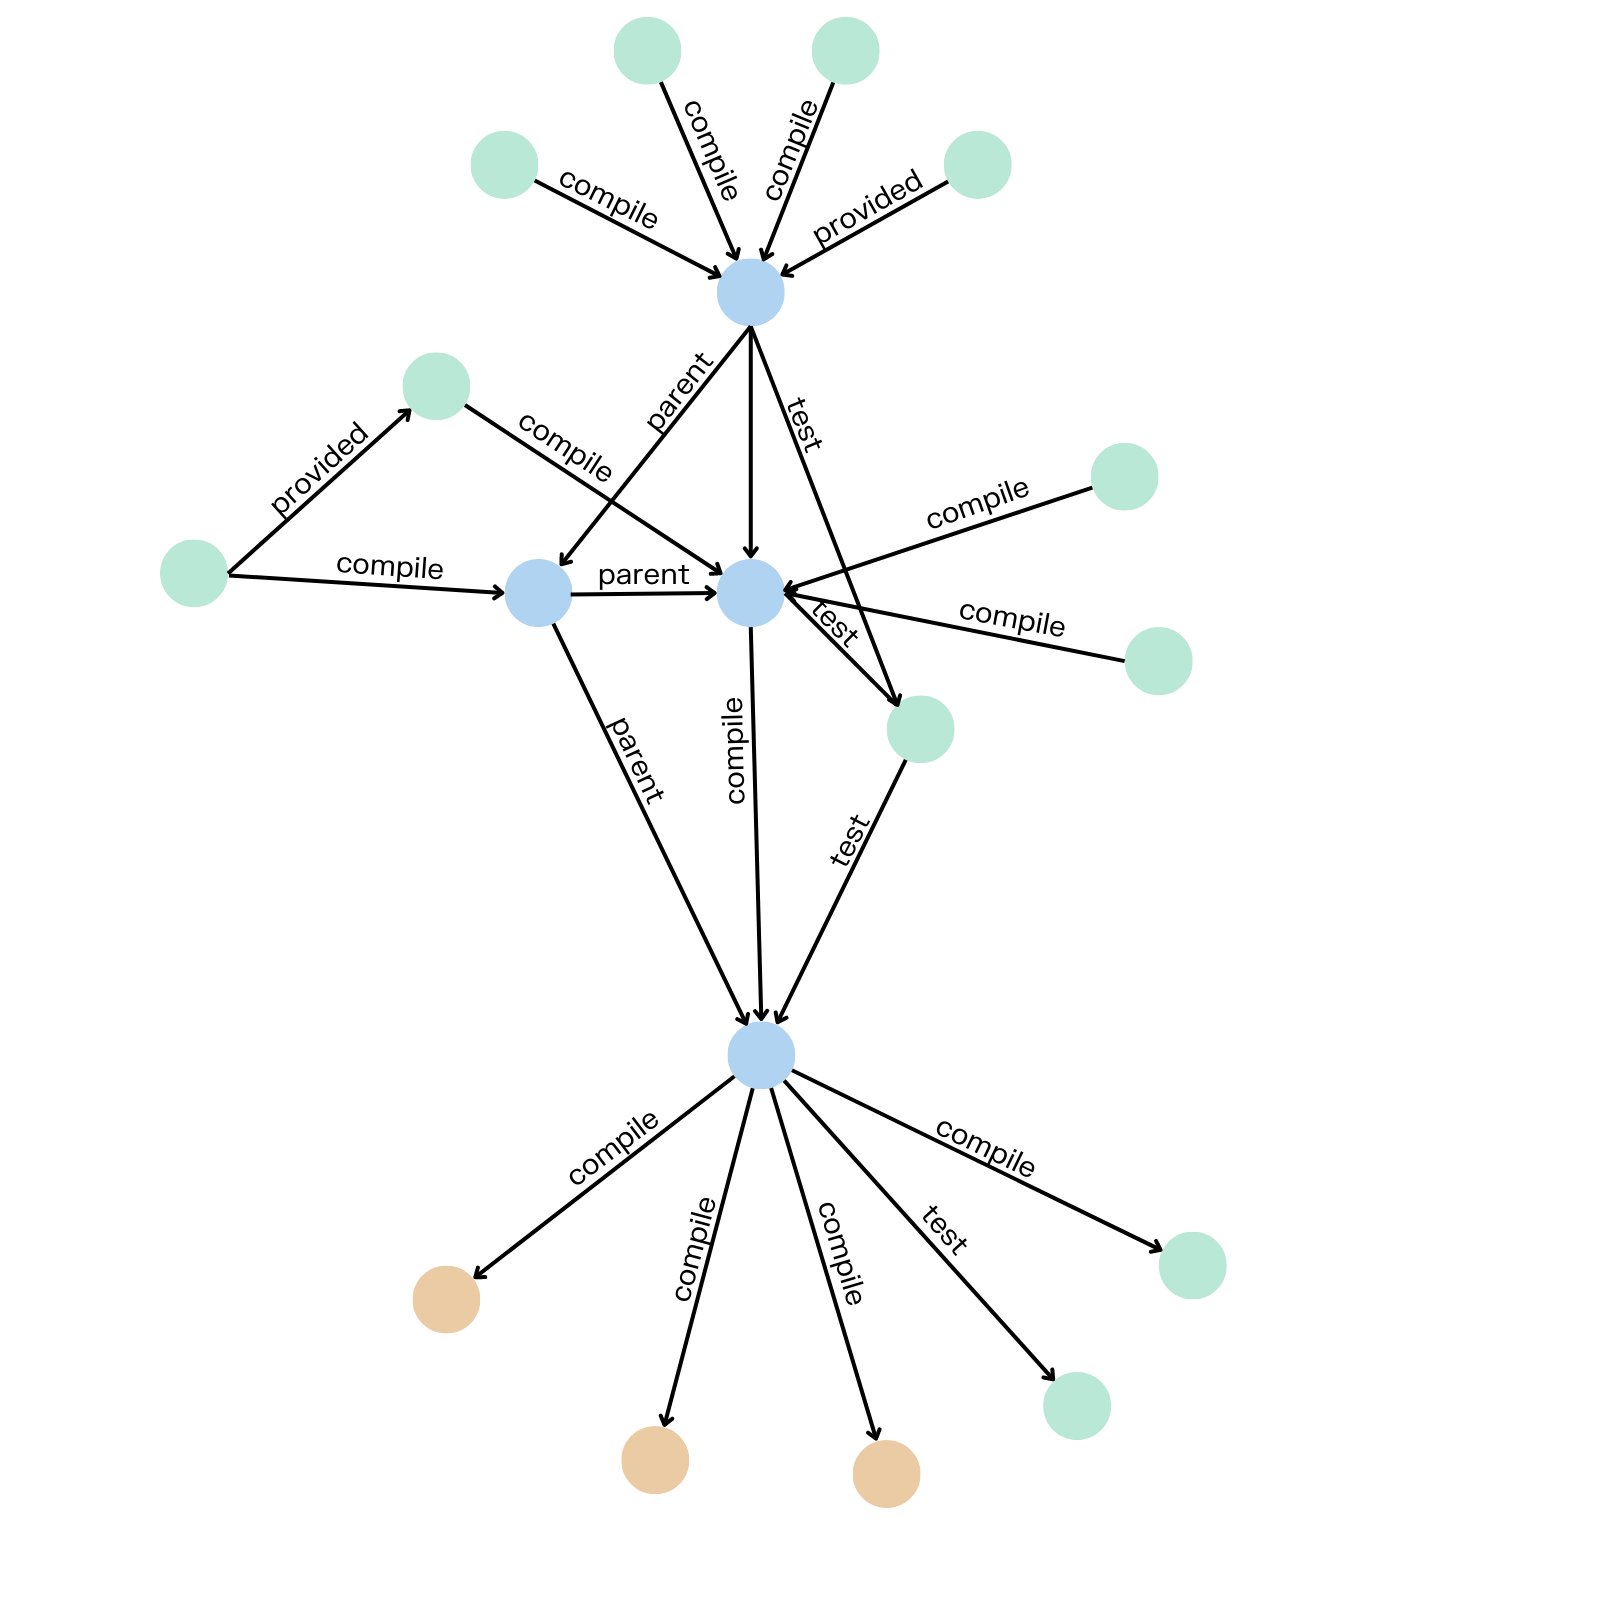 A simple graph visualization of a software dependency graph